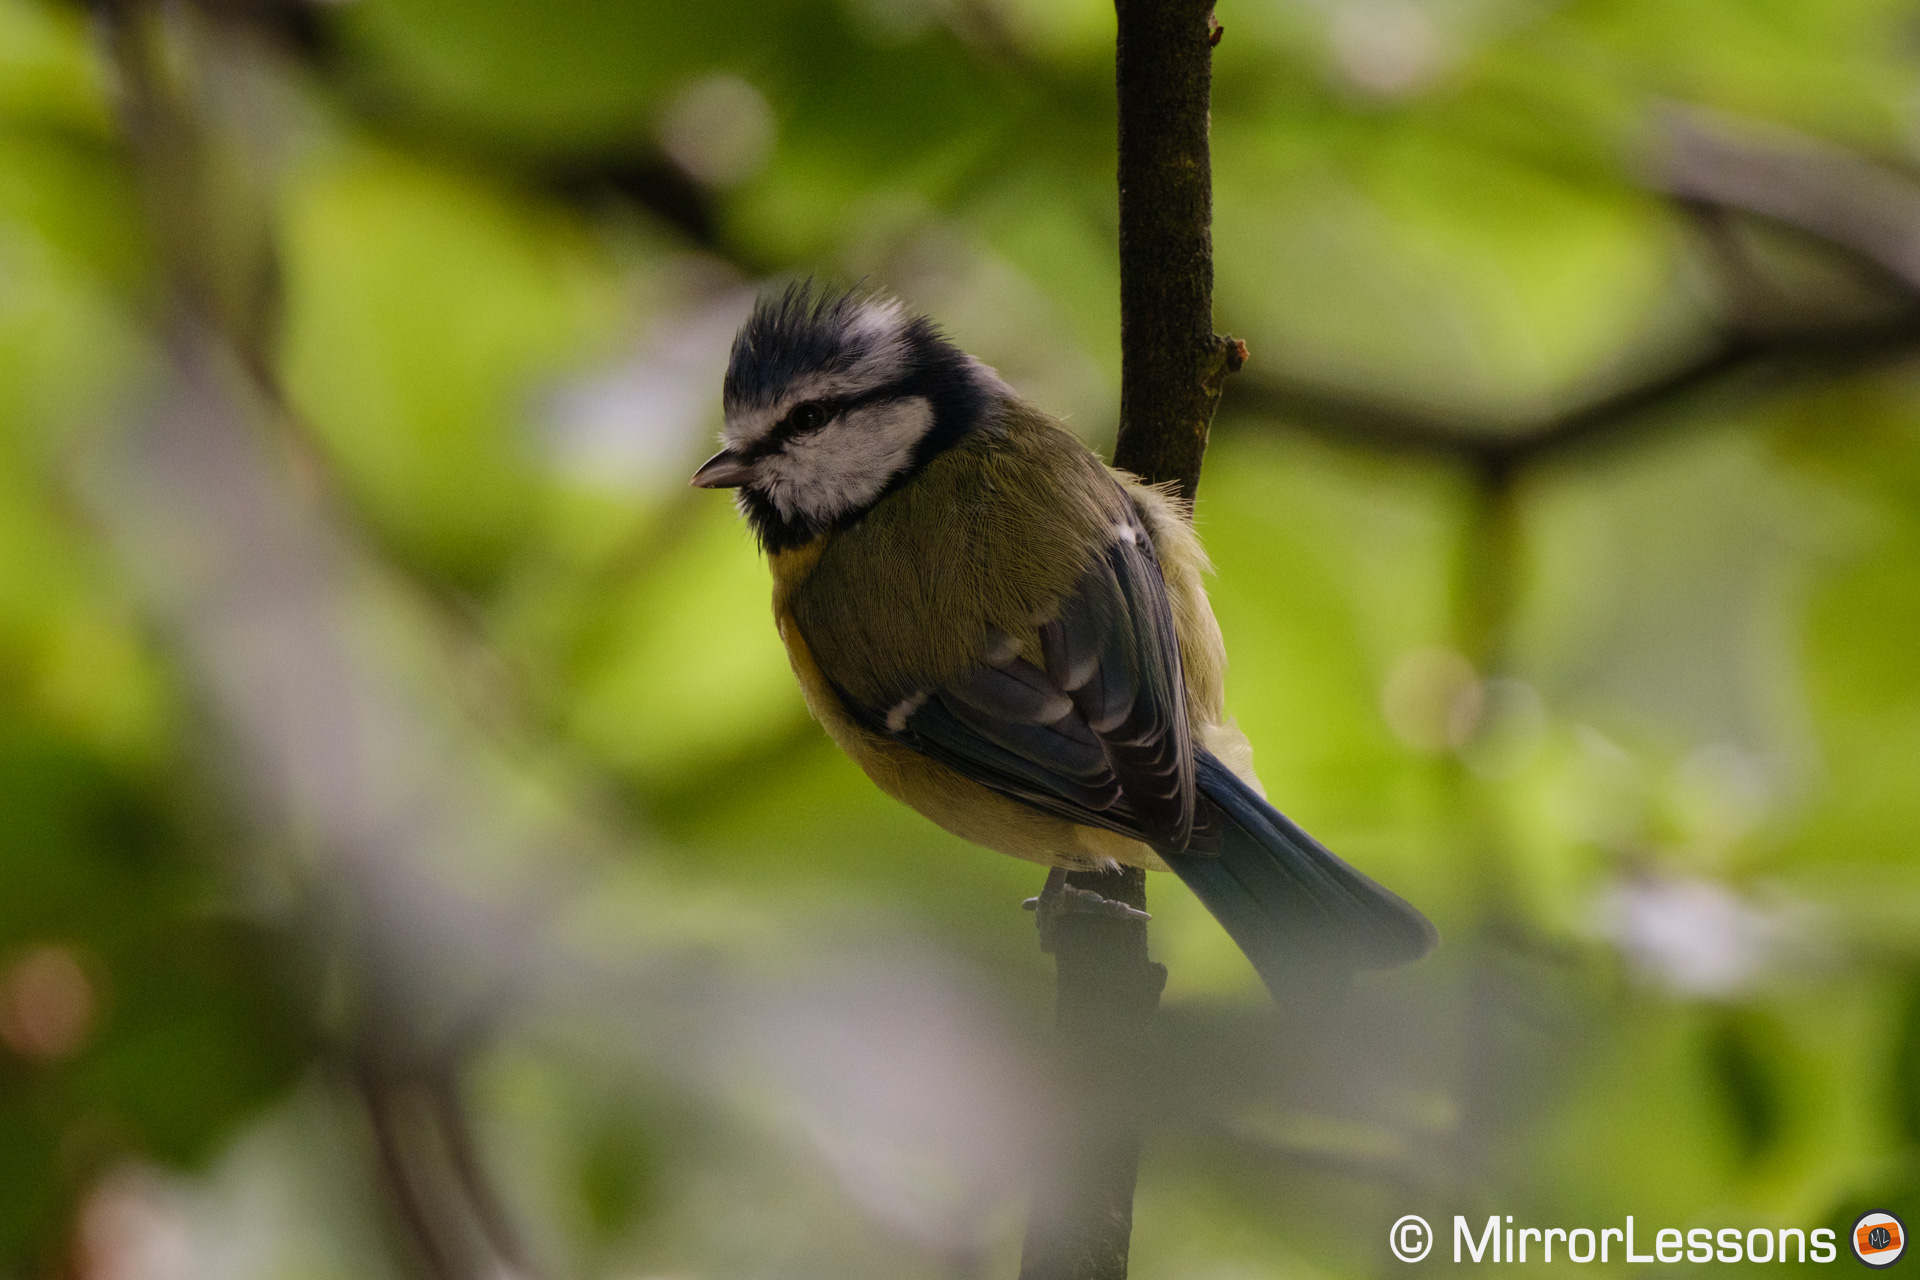 Blue tit perched on a tree, in the shades